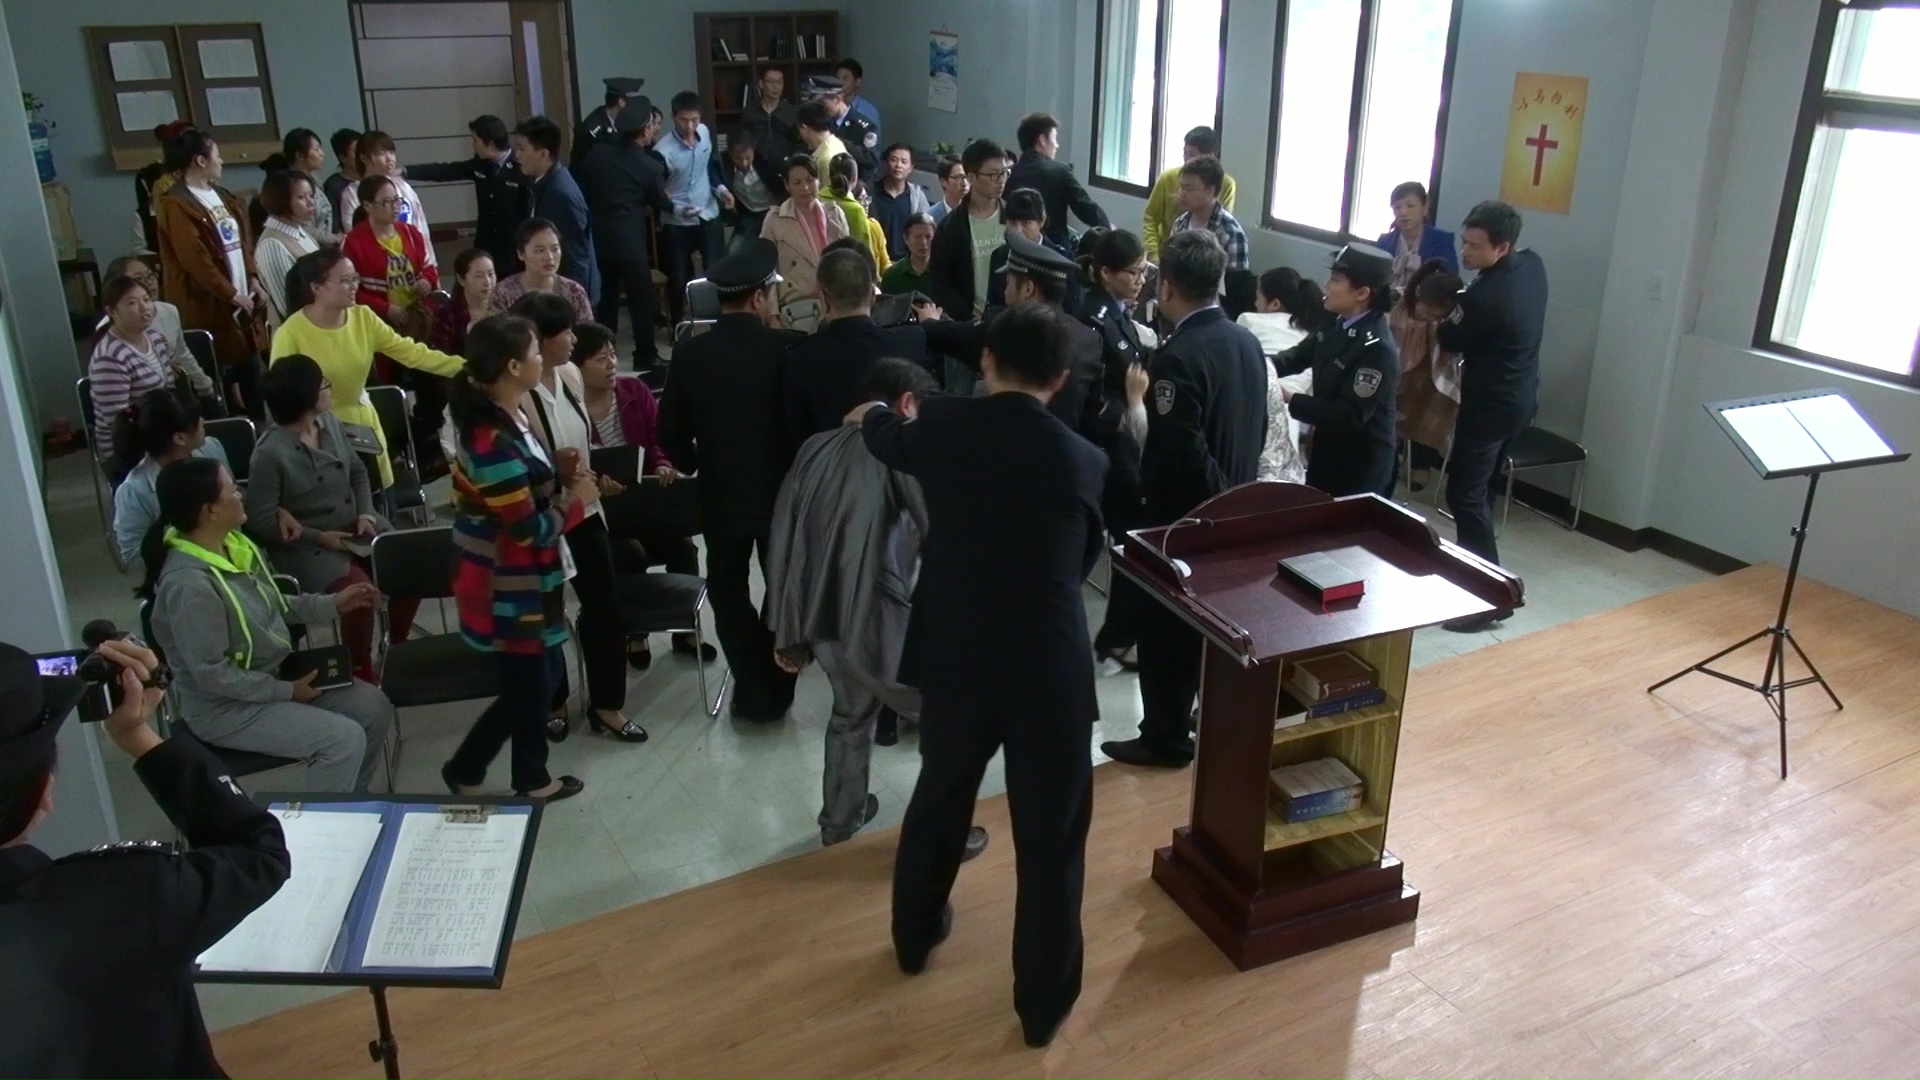 The policemen are arresting Christians during the meeting.